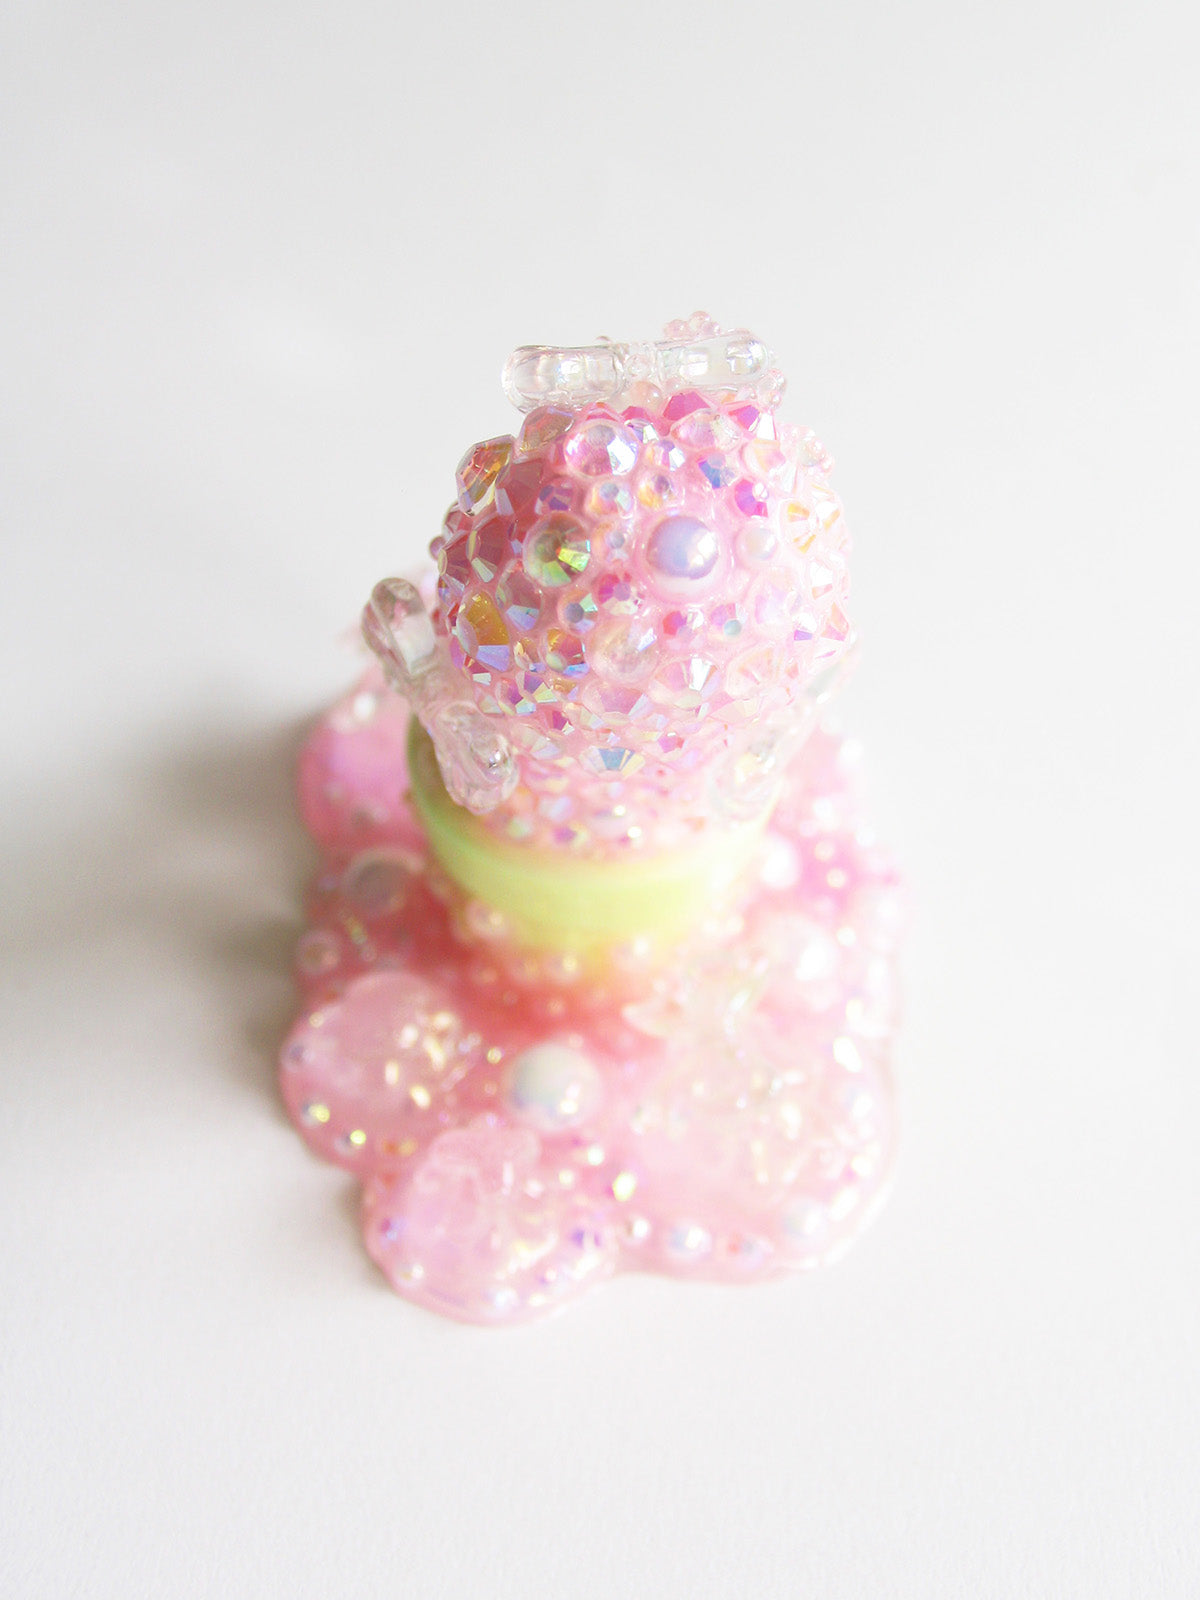 Pink slime with glitter and bubbles, close-up of a confectionery item, custom design by Simon Says Macy & Friends.